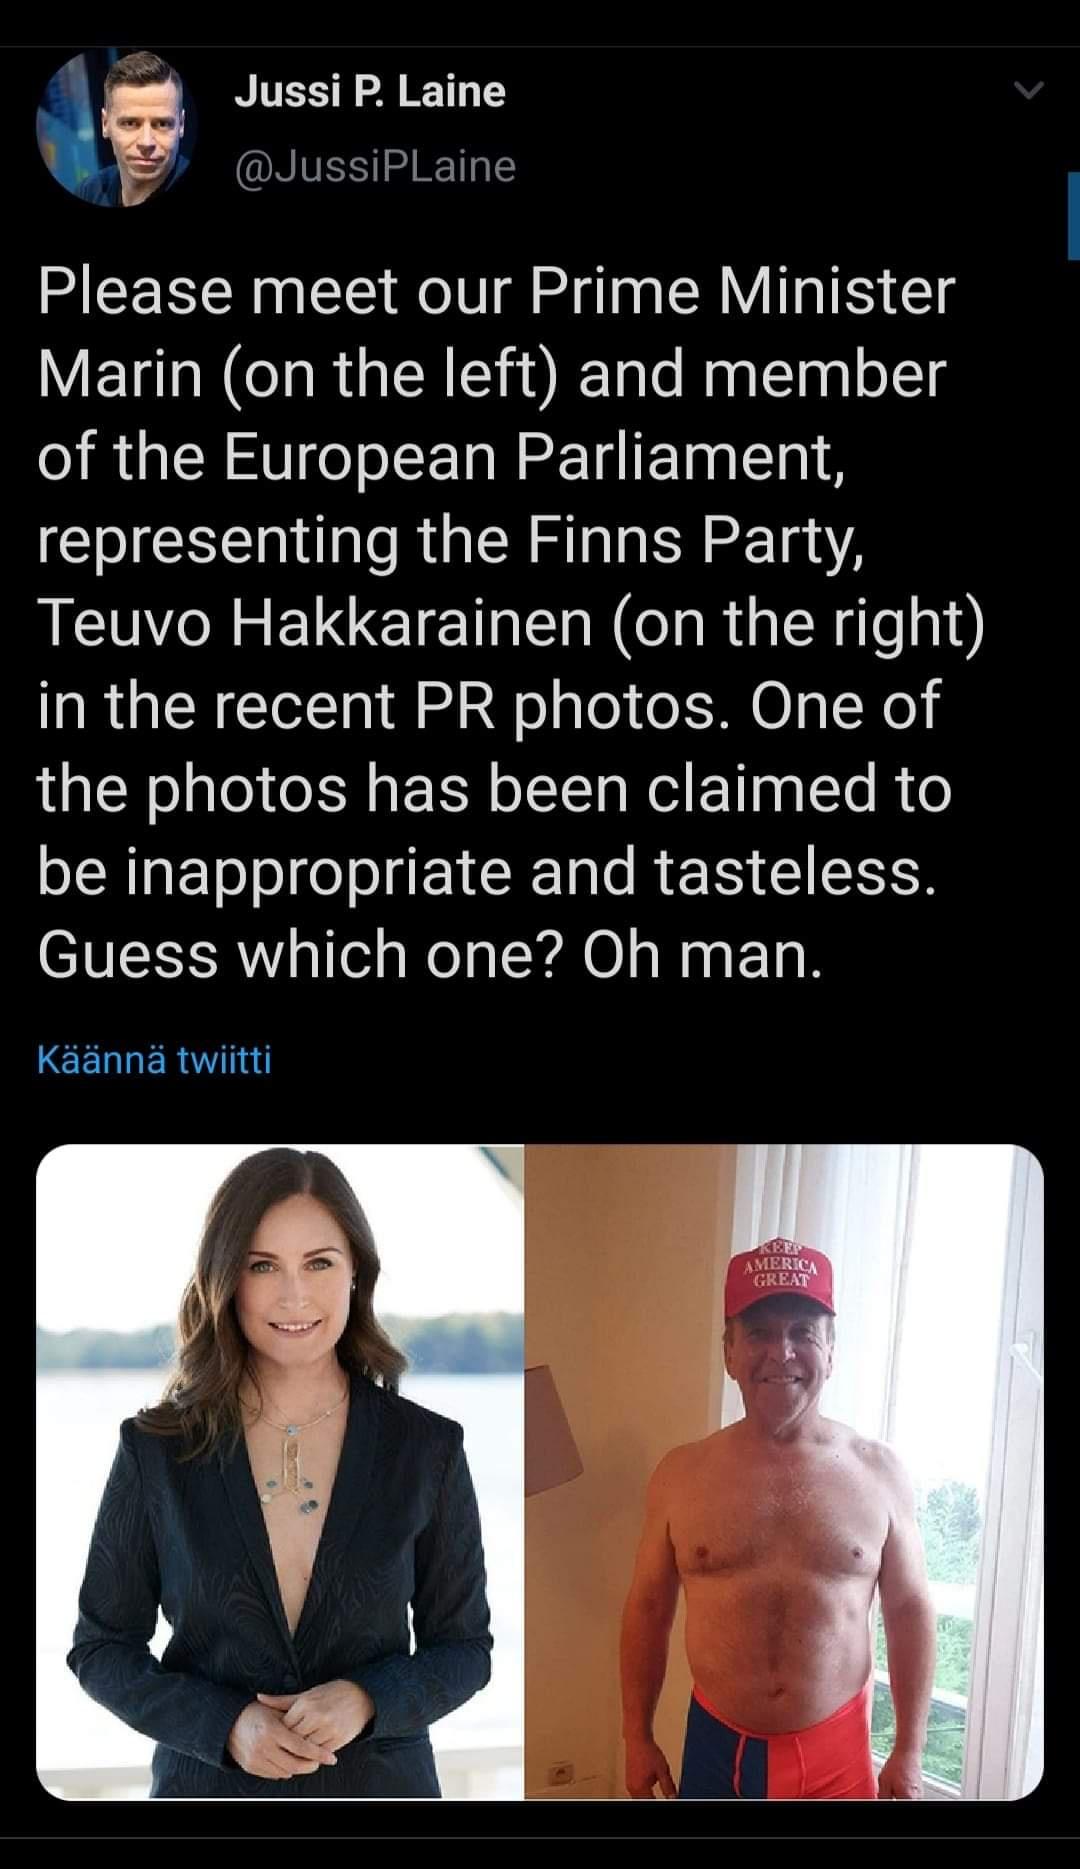 muscle - Jussi P. Laine Please meet our Prime Minister Marin on the left and member of the European Parliament, representing the Finns Party, Teuvo Hakkarainen on the right in the recent Pr photos. One of the photos has been claimed to be inappropriate an